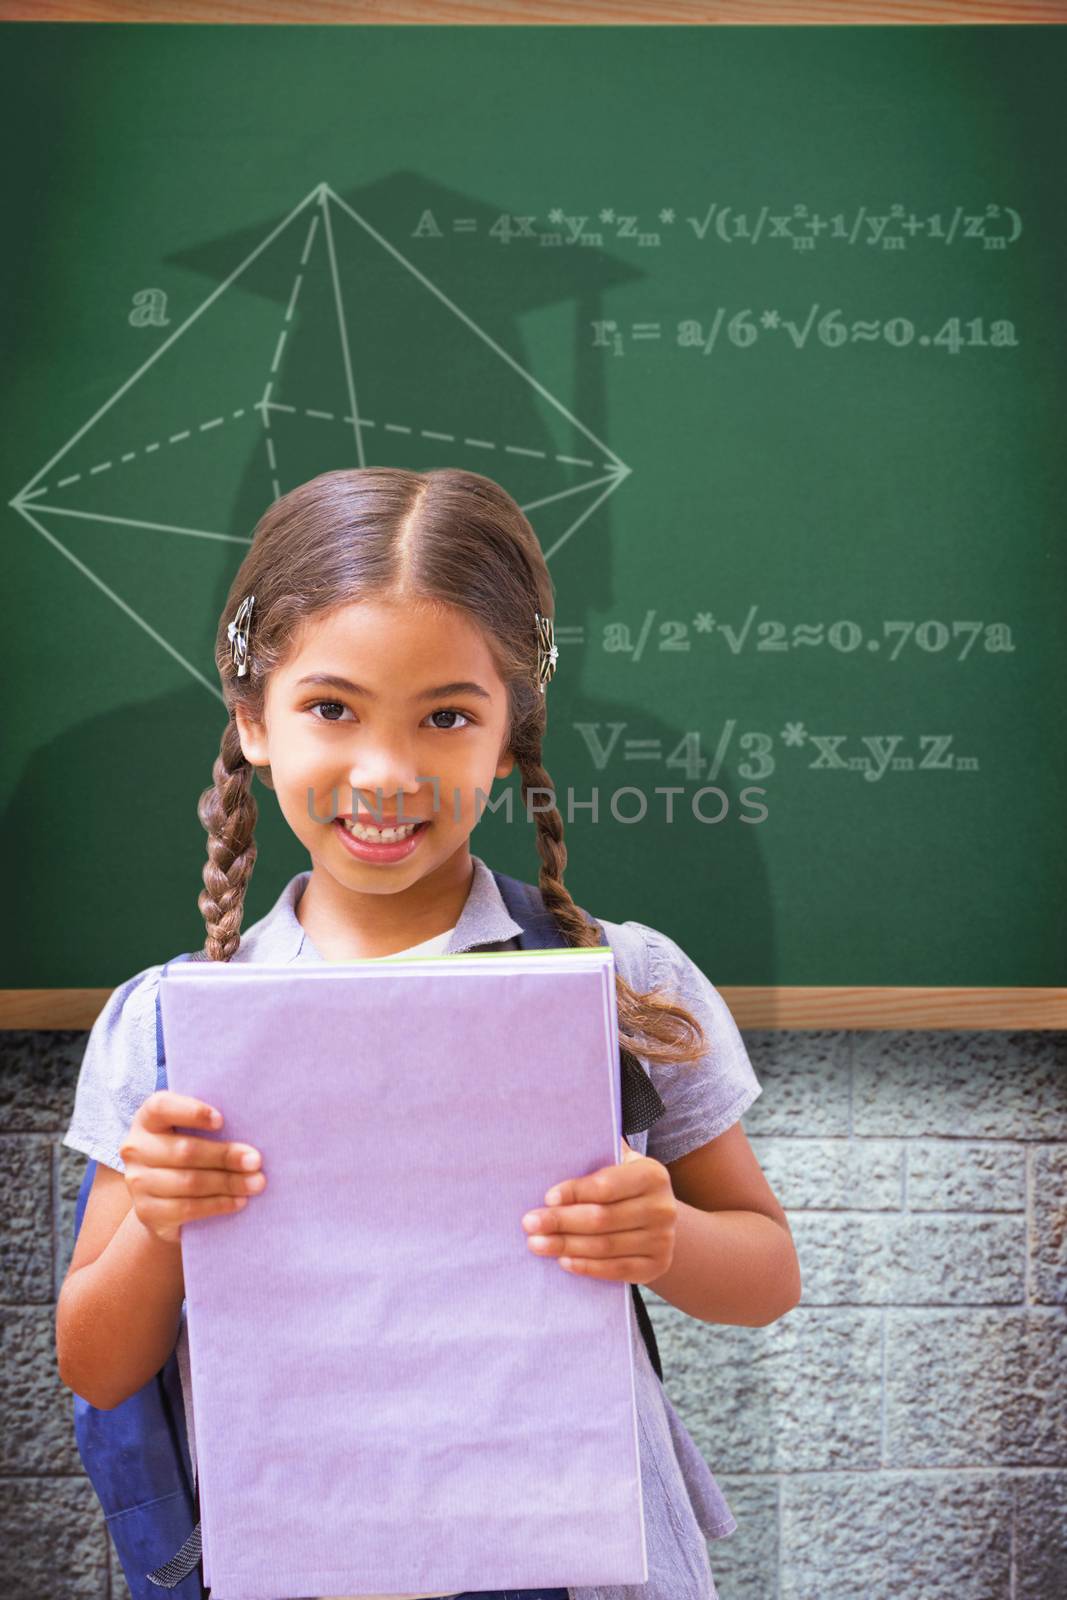 Cute pupil smiling at camera holding notepad  against green